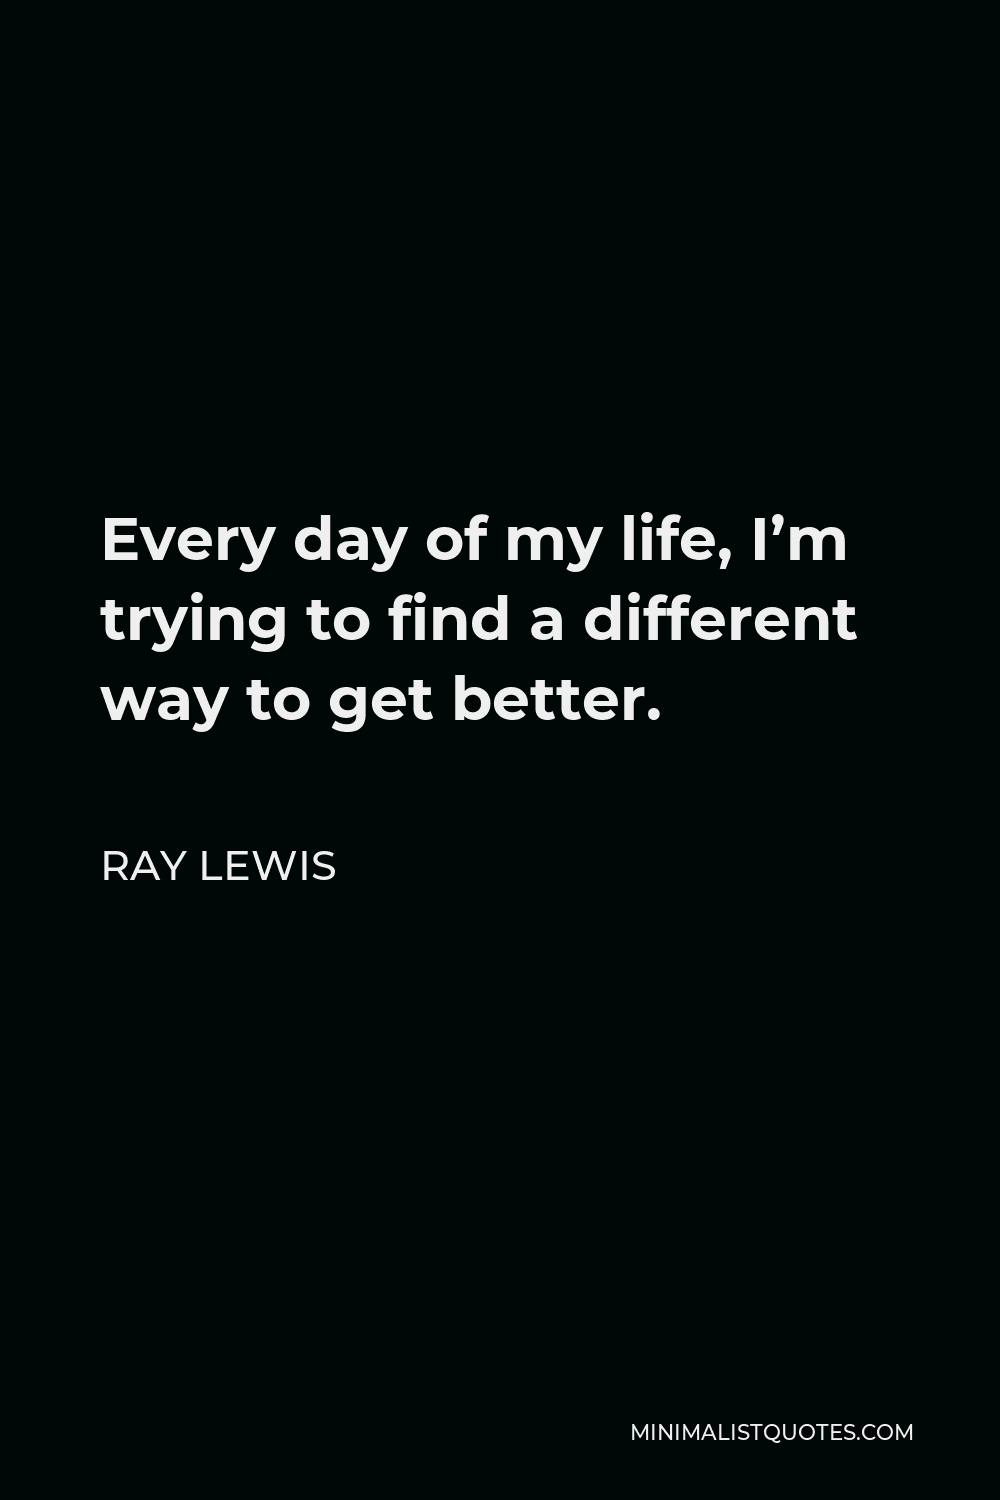 Ray Lewis Quote - Every day of my life, I’m trying to find a different way to get better.